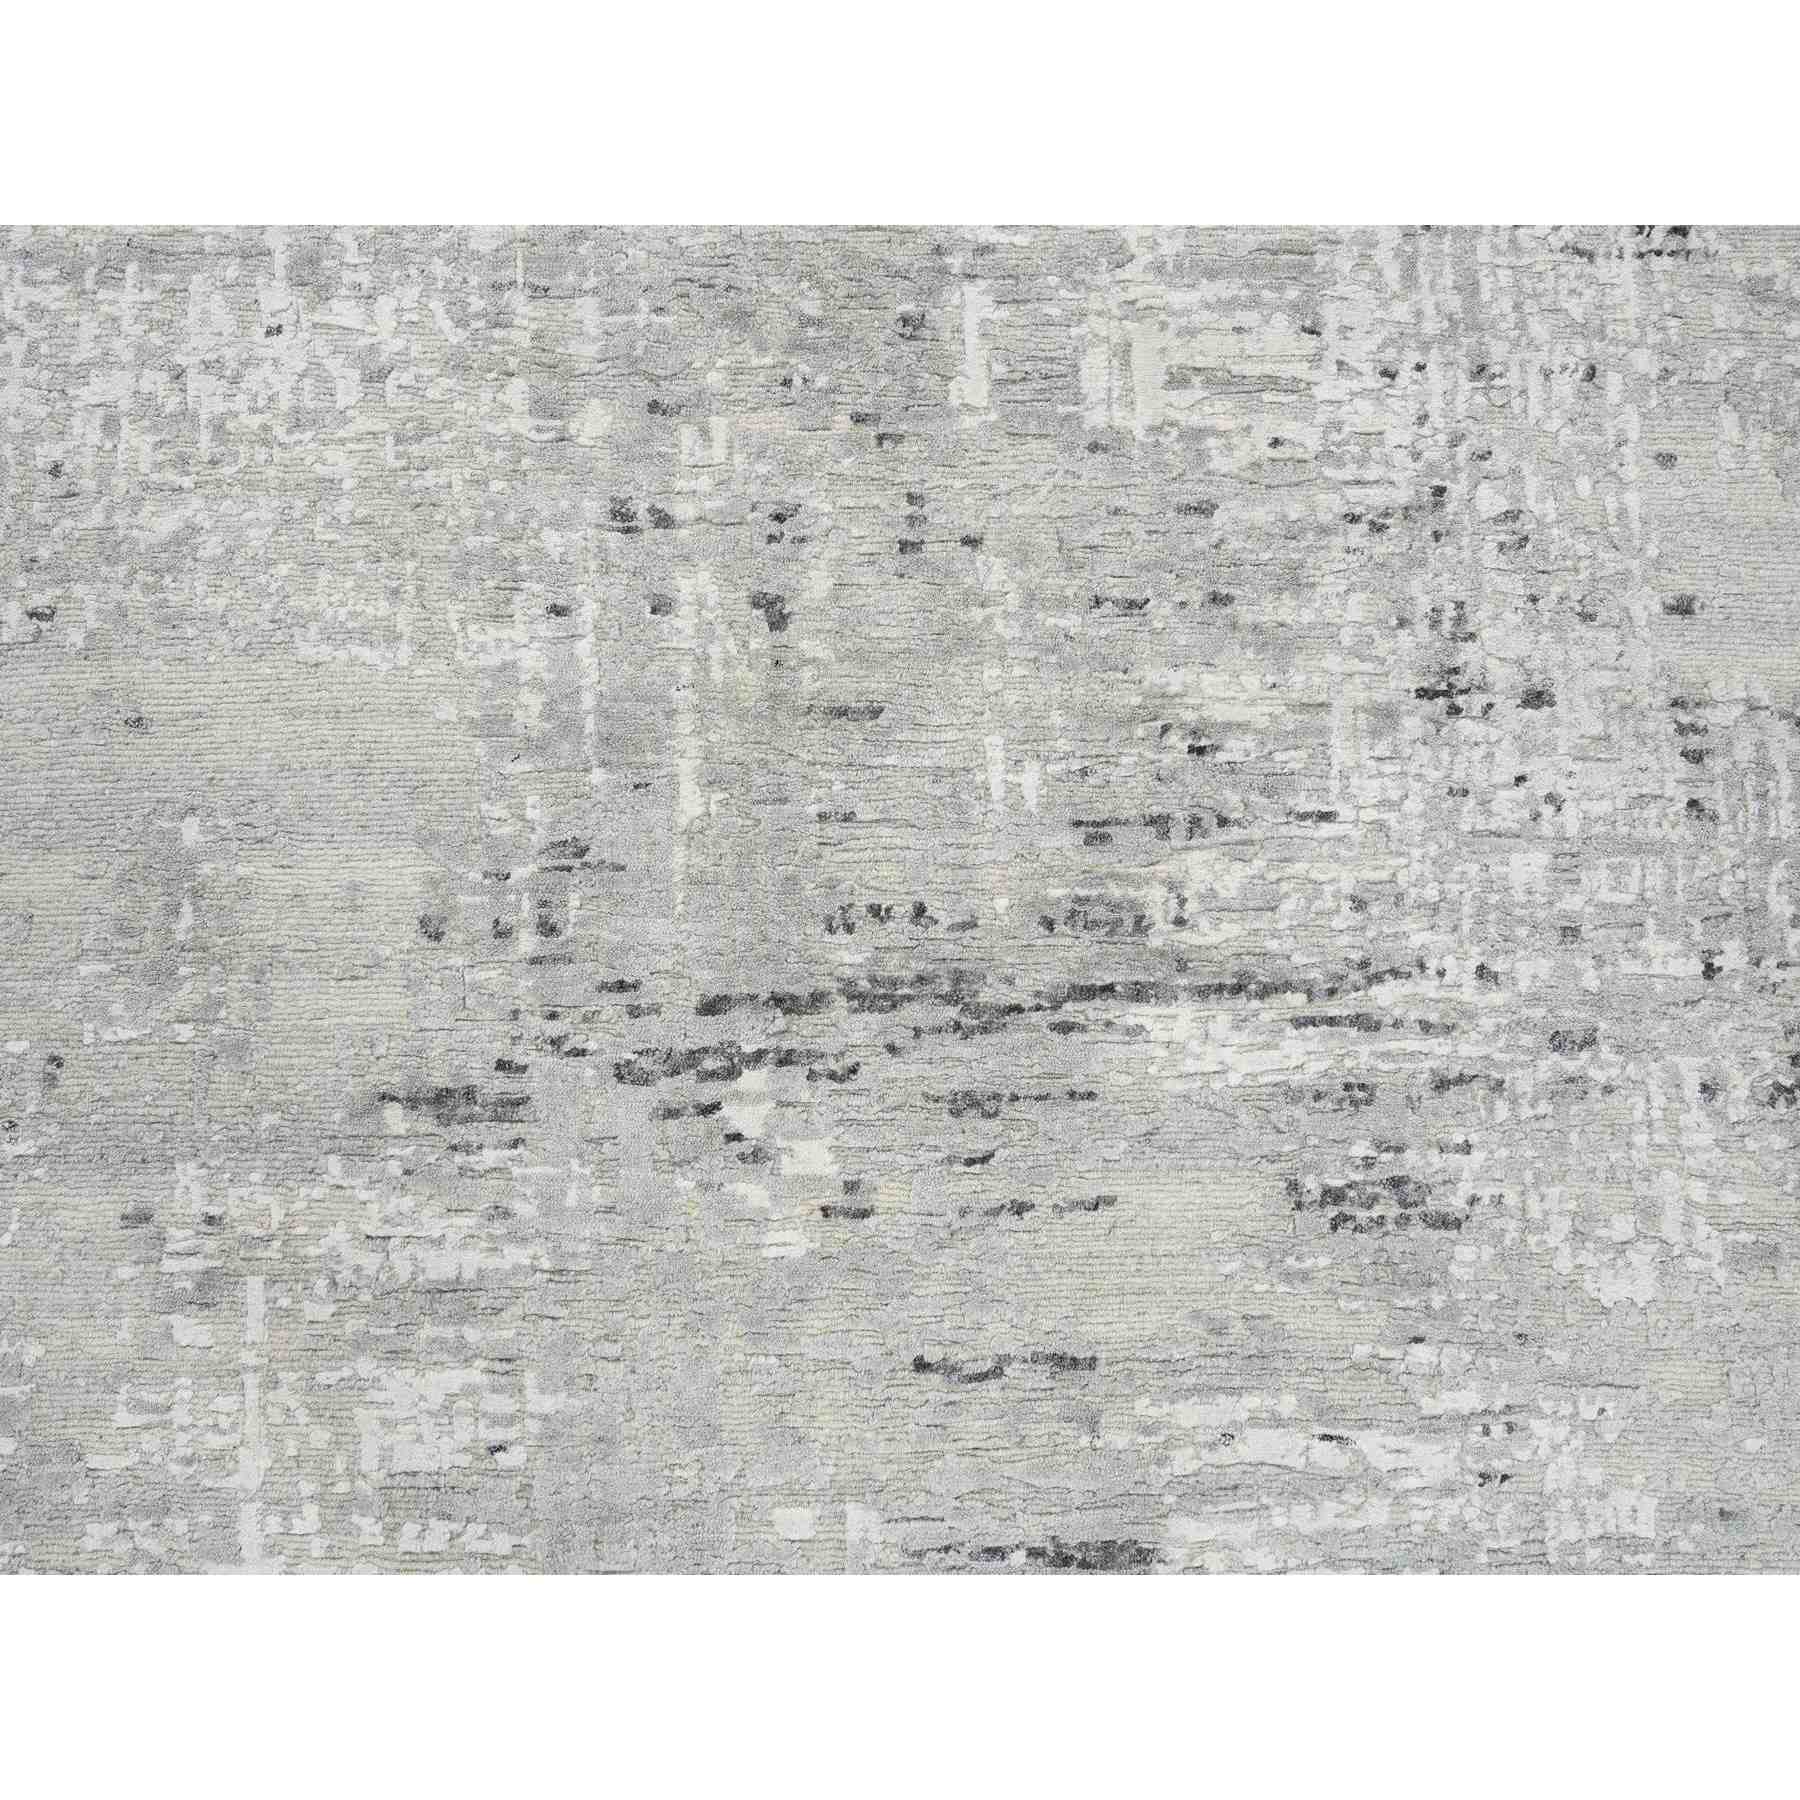 Modern-and-Contemporary-Hand-Knotted-Rug-320795